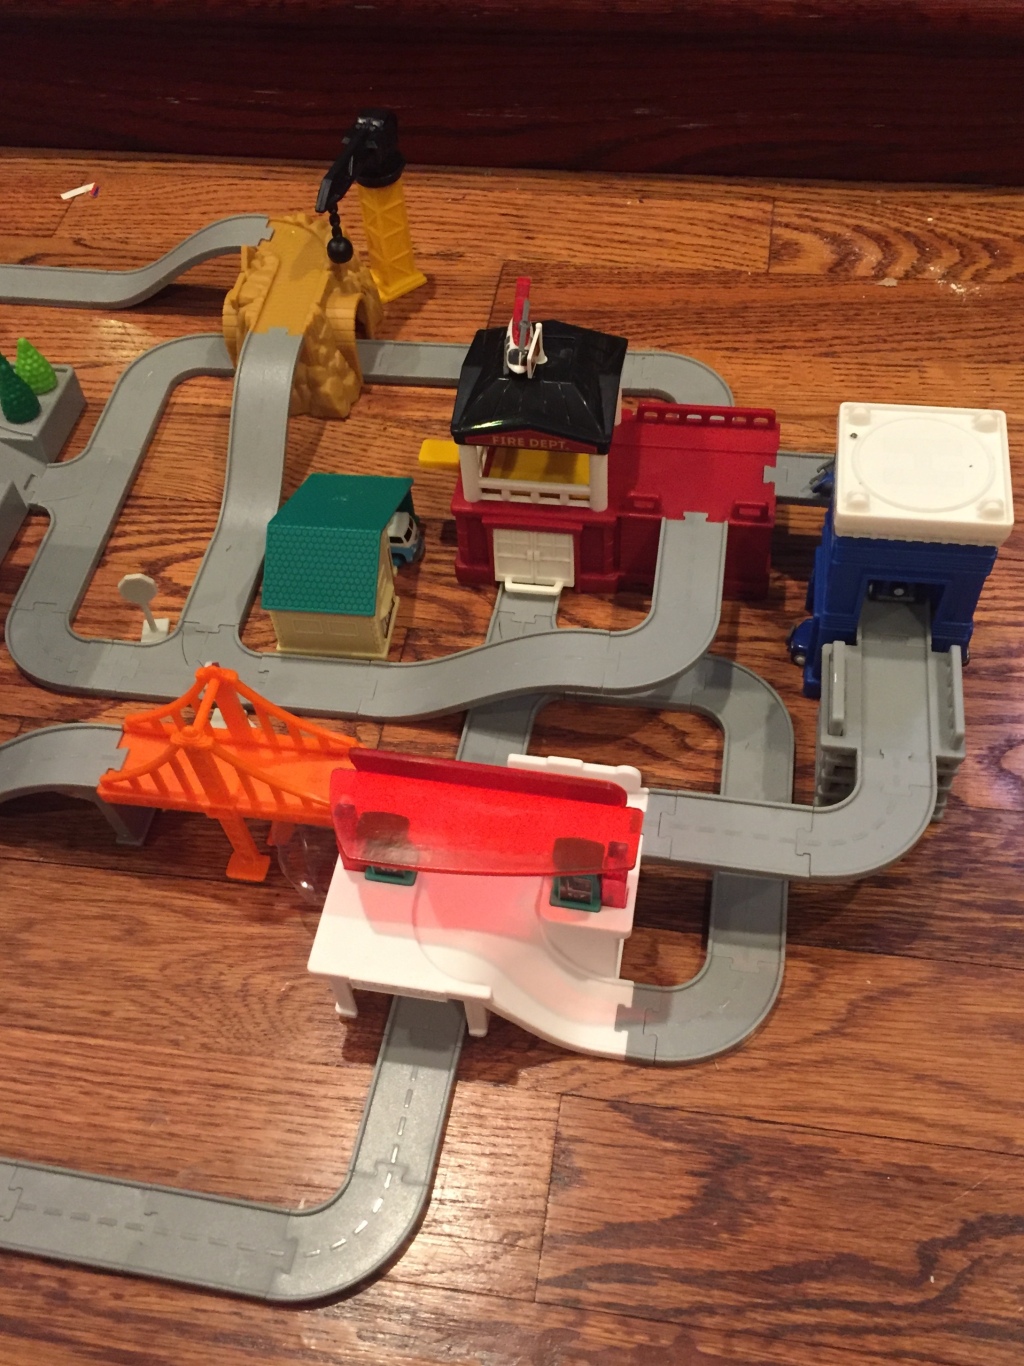 Driven Pocket Series Build-A-City Playset assembled on floor